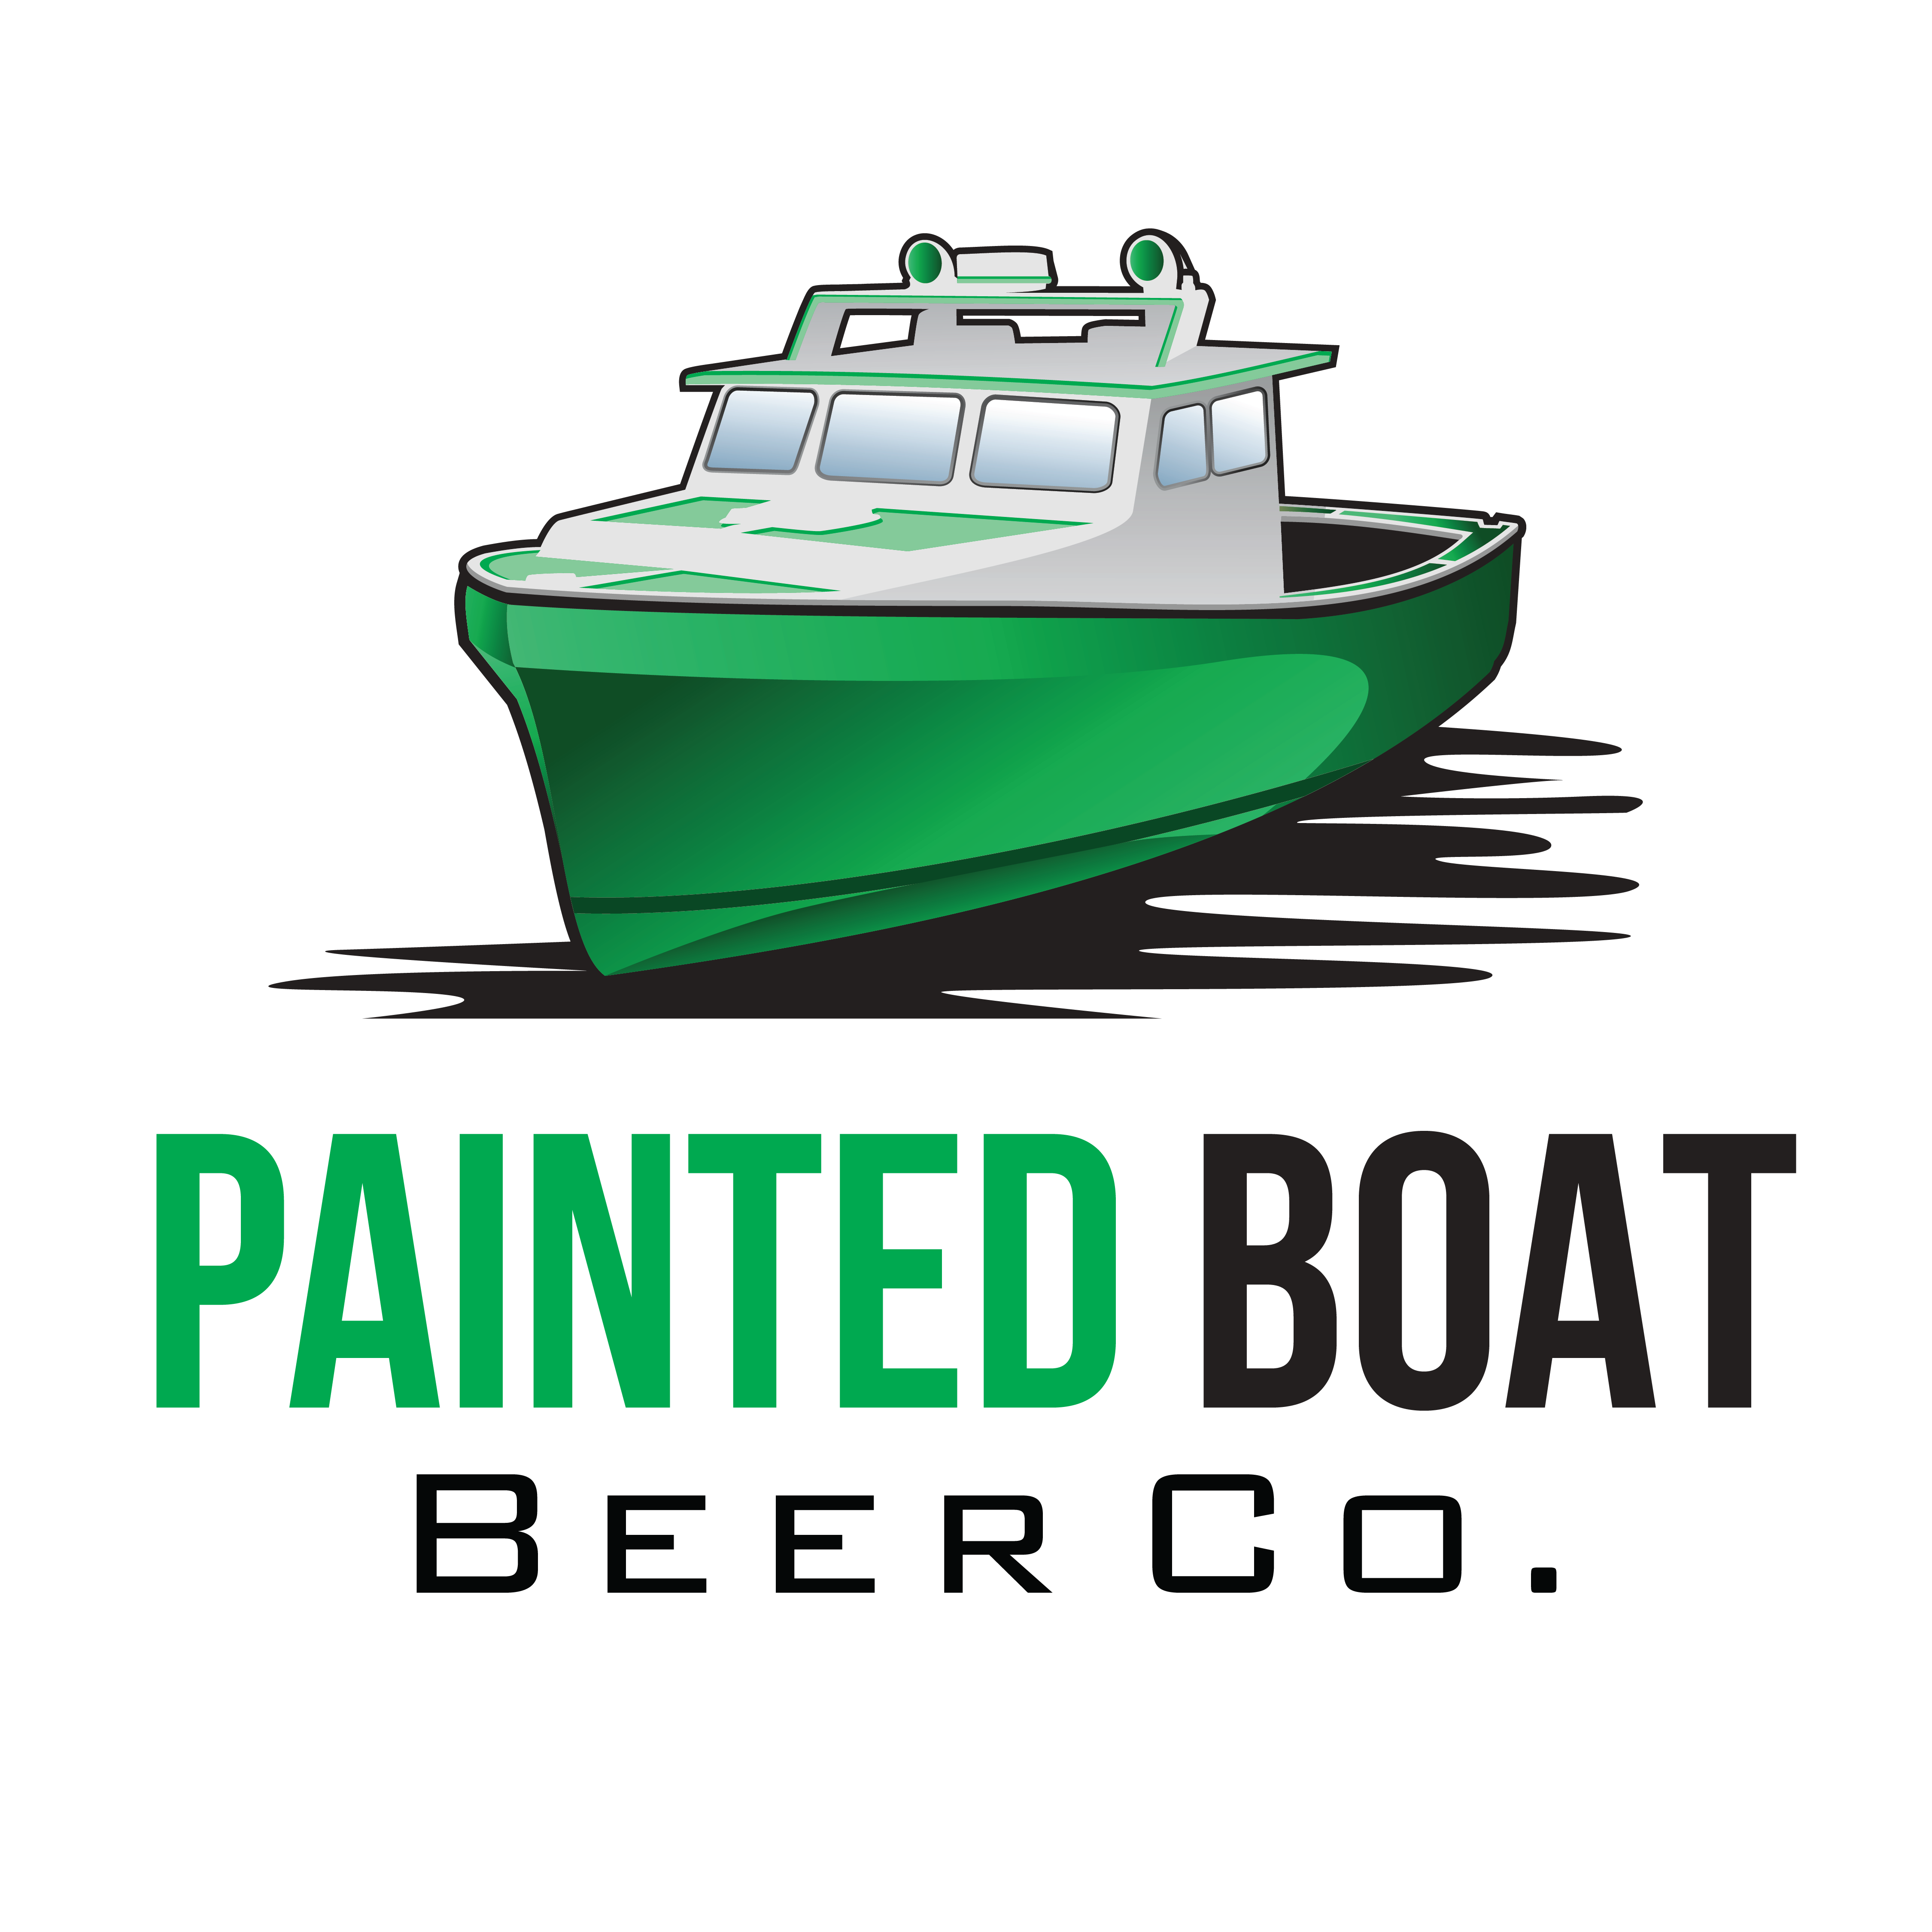 Painted Boat Beer Co.